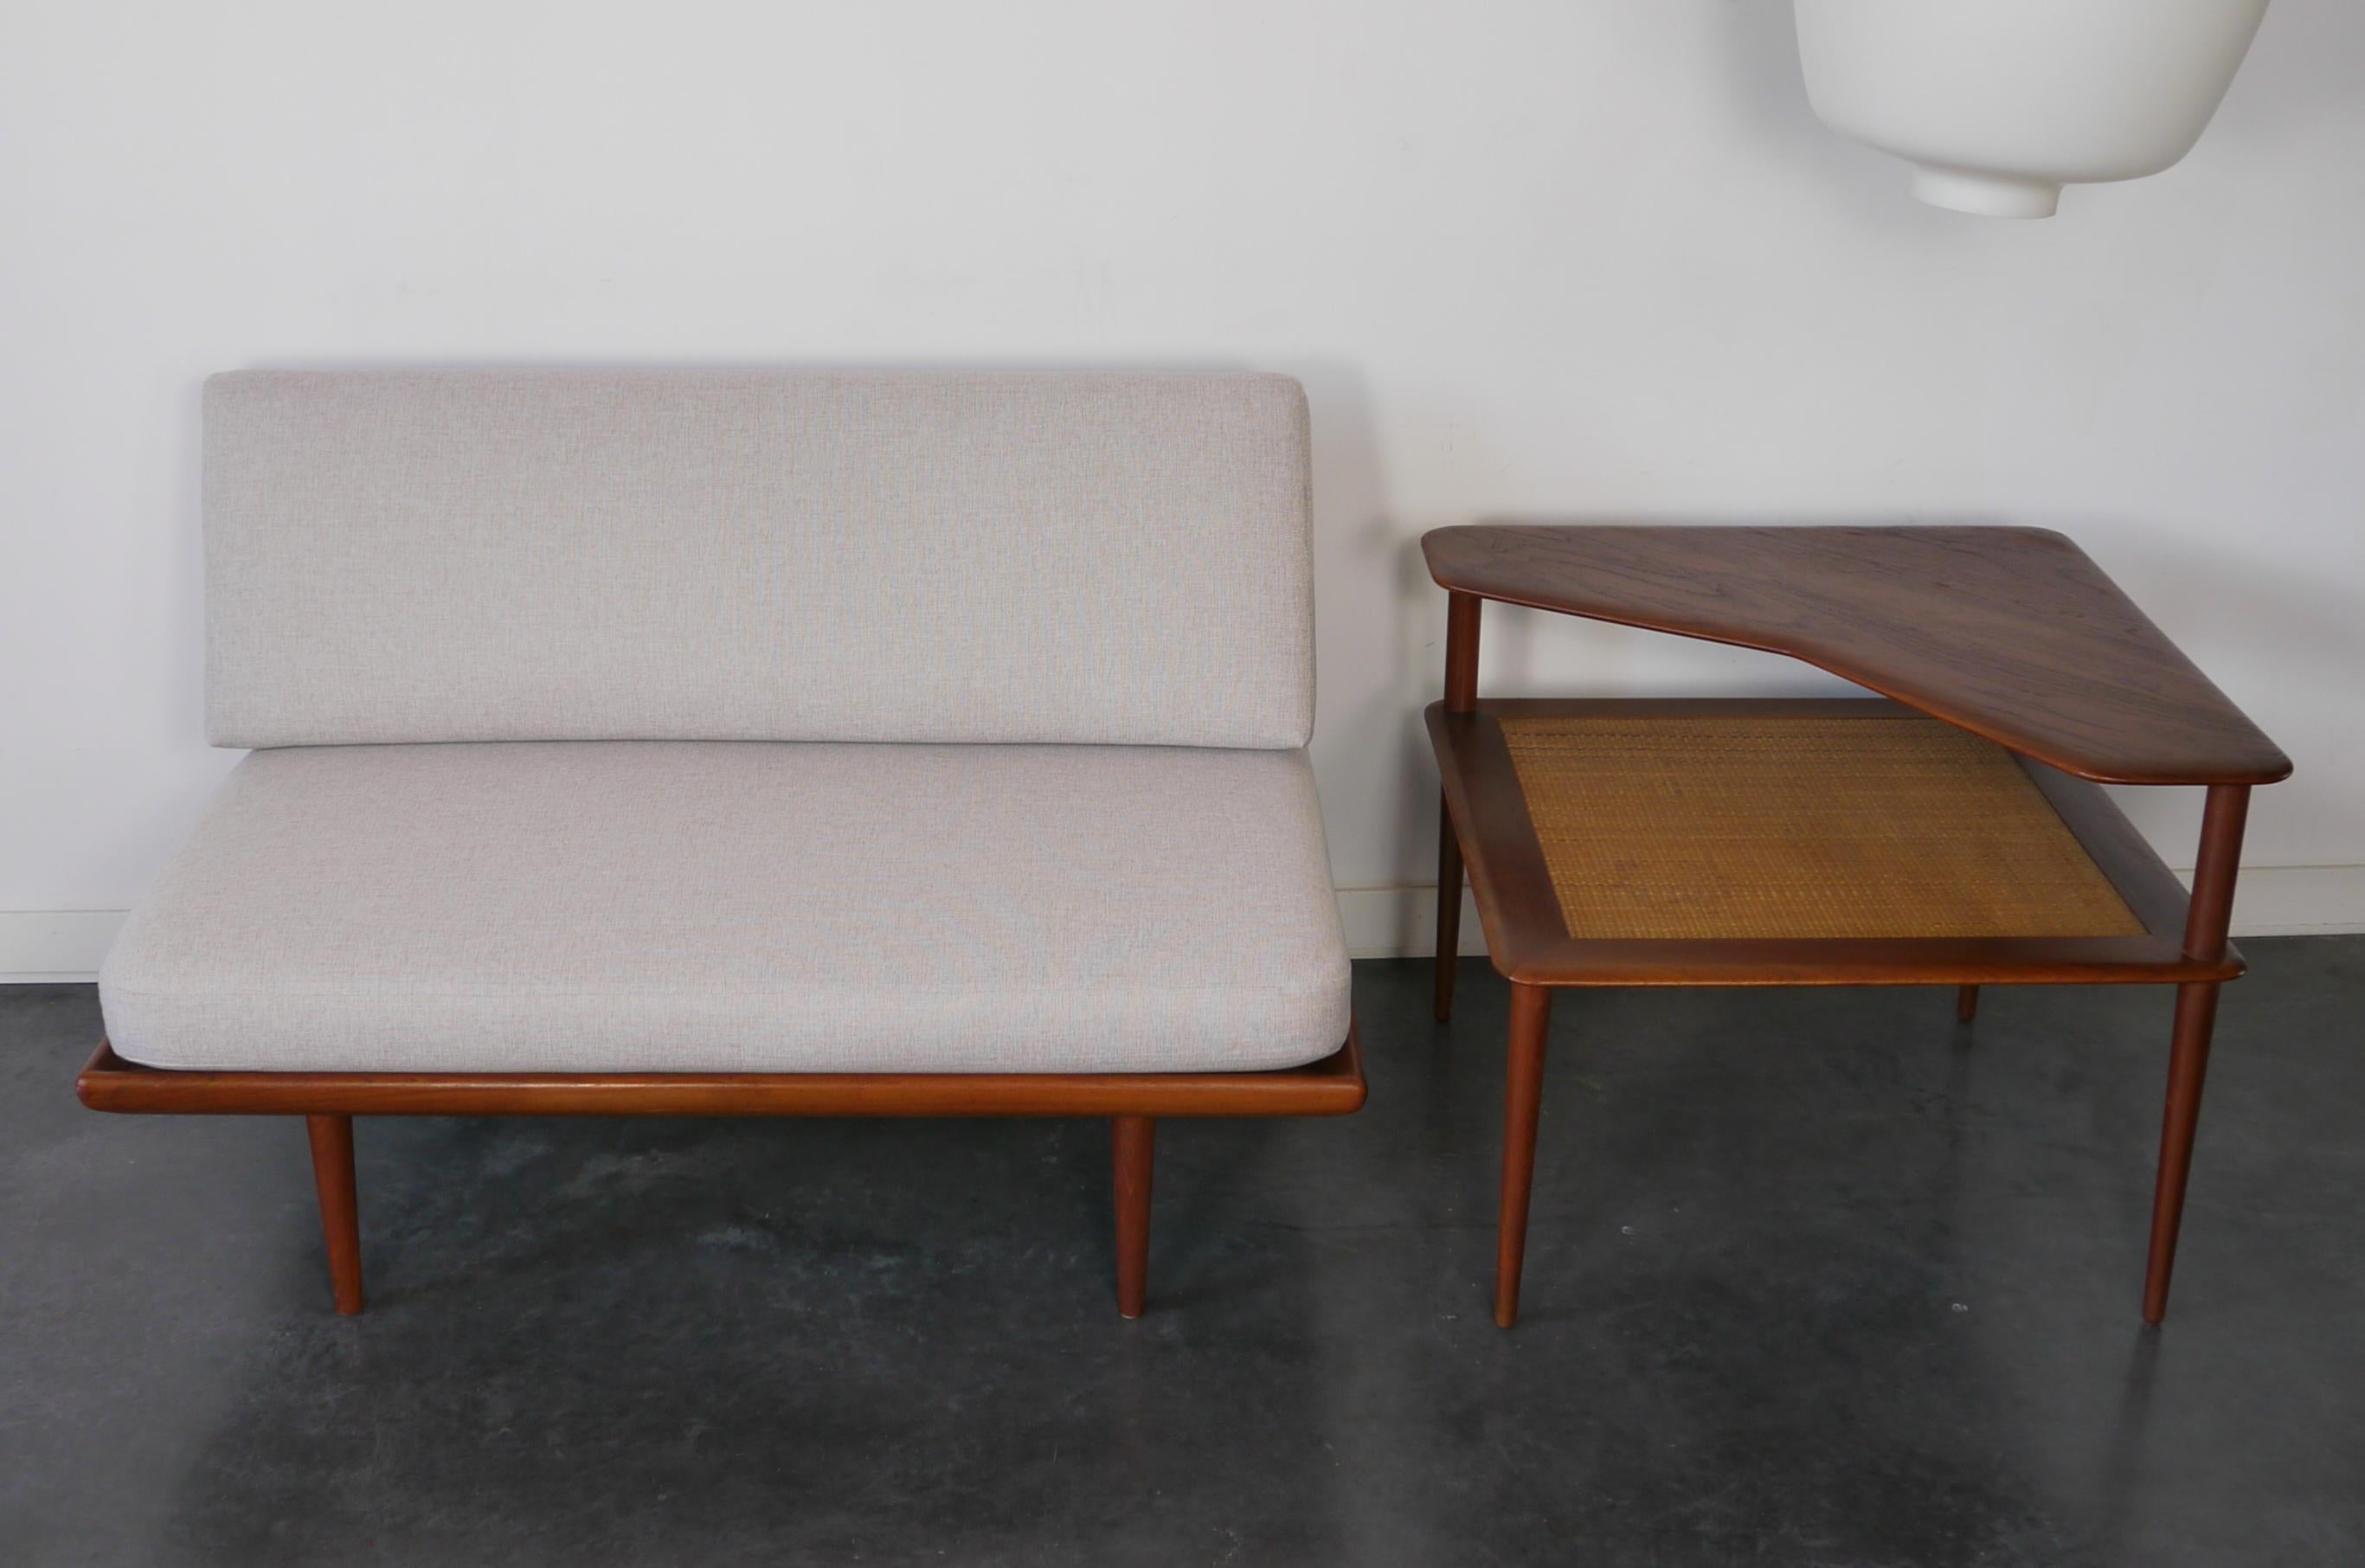 A classic 2 seater sofa and daybed designed by the Danish architects Peter Hvidt & Orla Mølgaard Nielsen. Produced in Denmark by France & Daverkosen during the 1950's.
This model FD 418a features a wooden frame made of solid teak, the upholstery